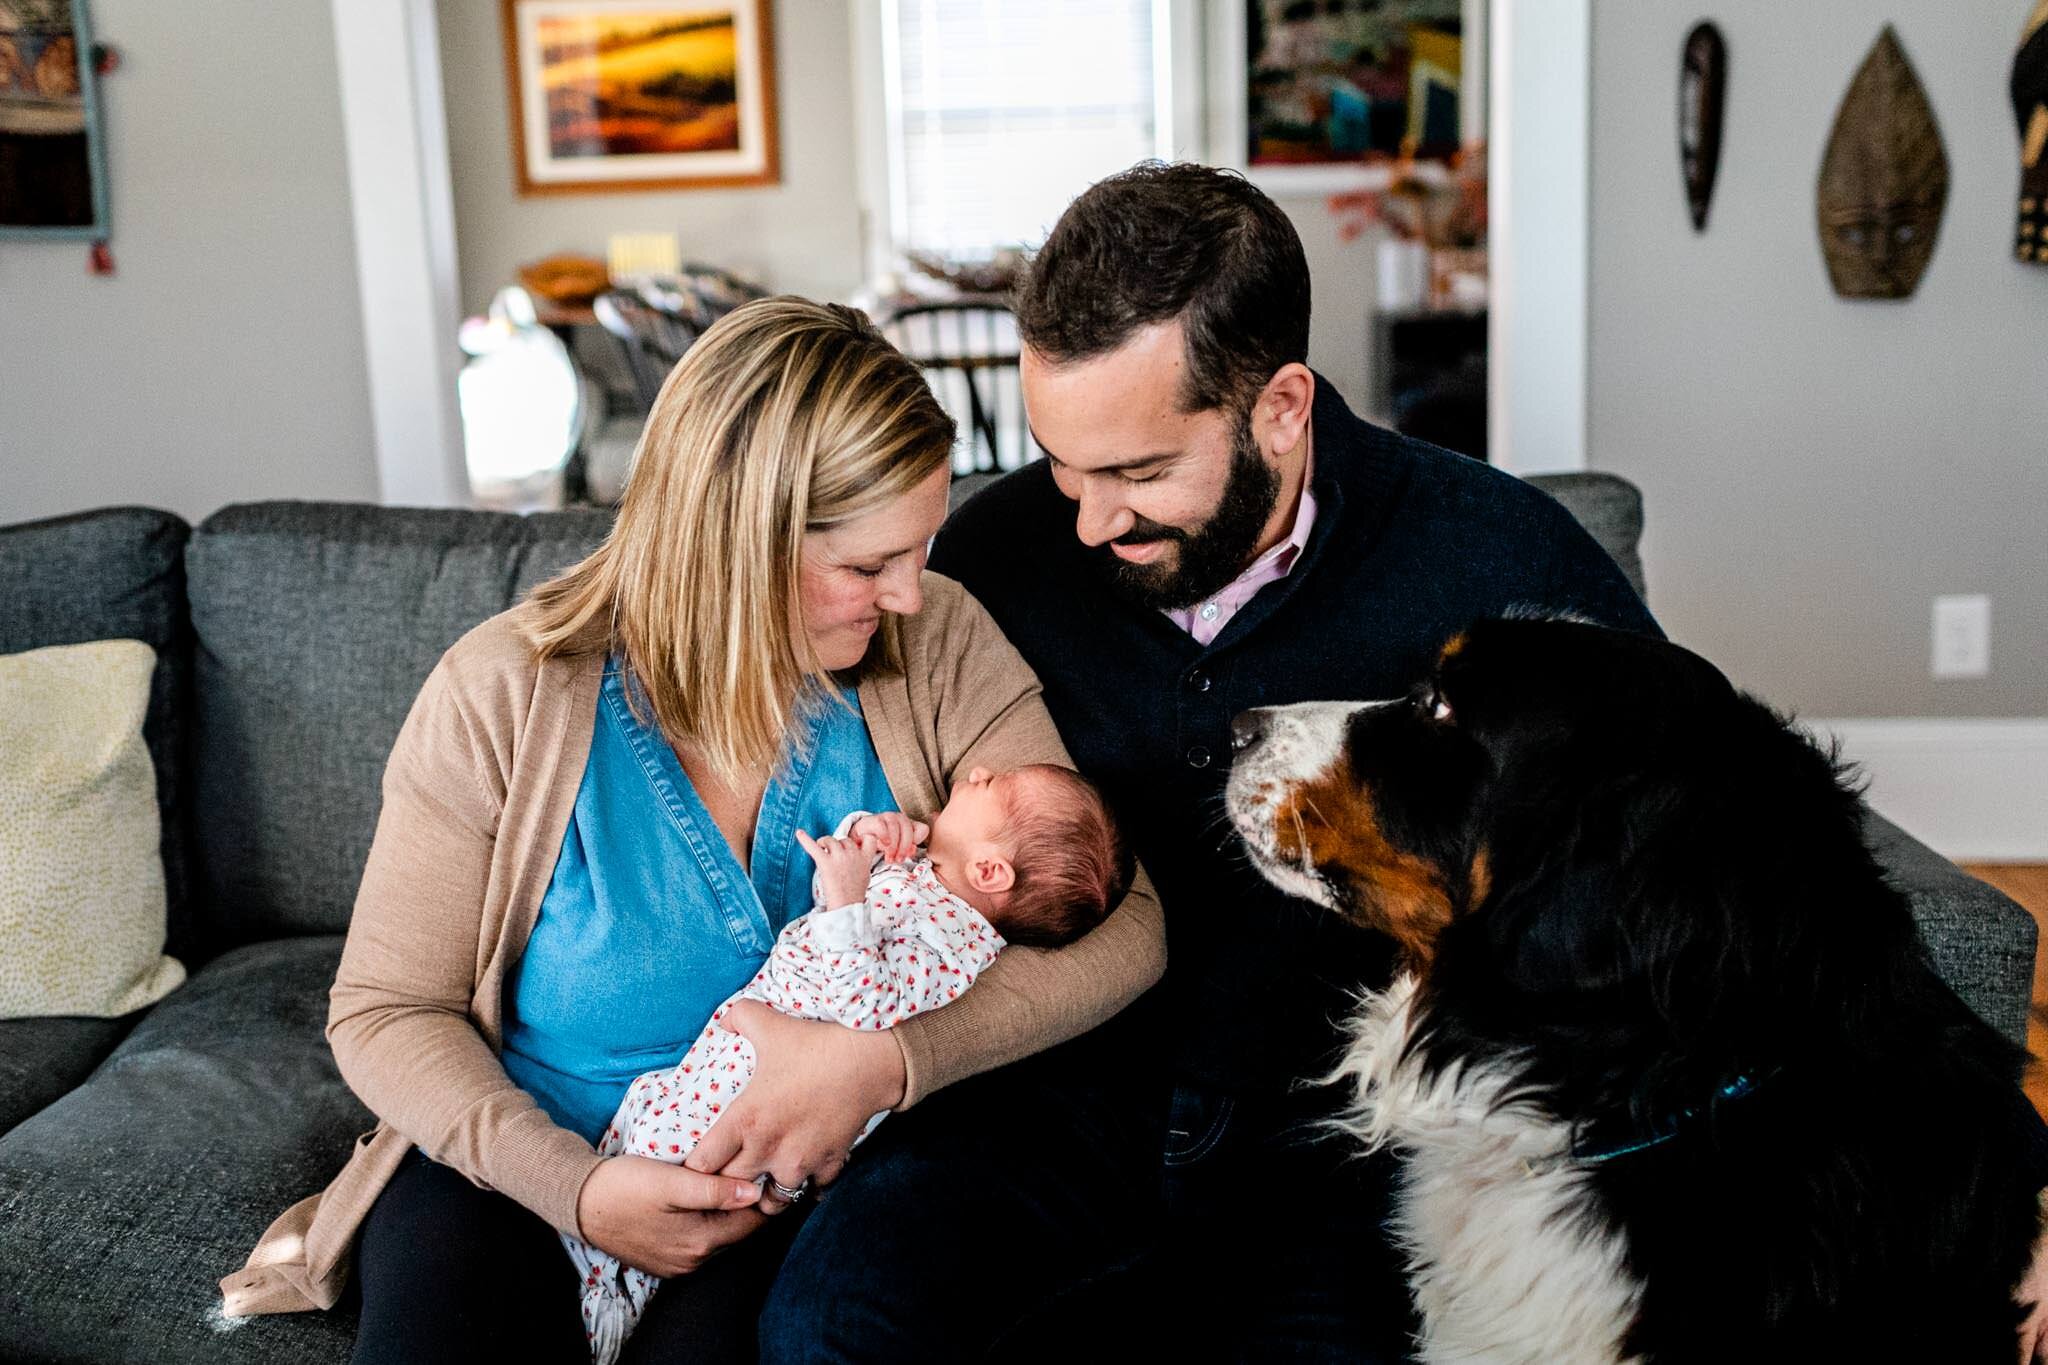 Durham Newborn Photographer | By G. Lin Photography | Family sitting on couch and smiling